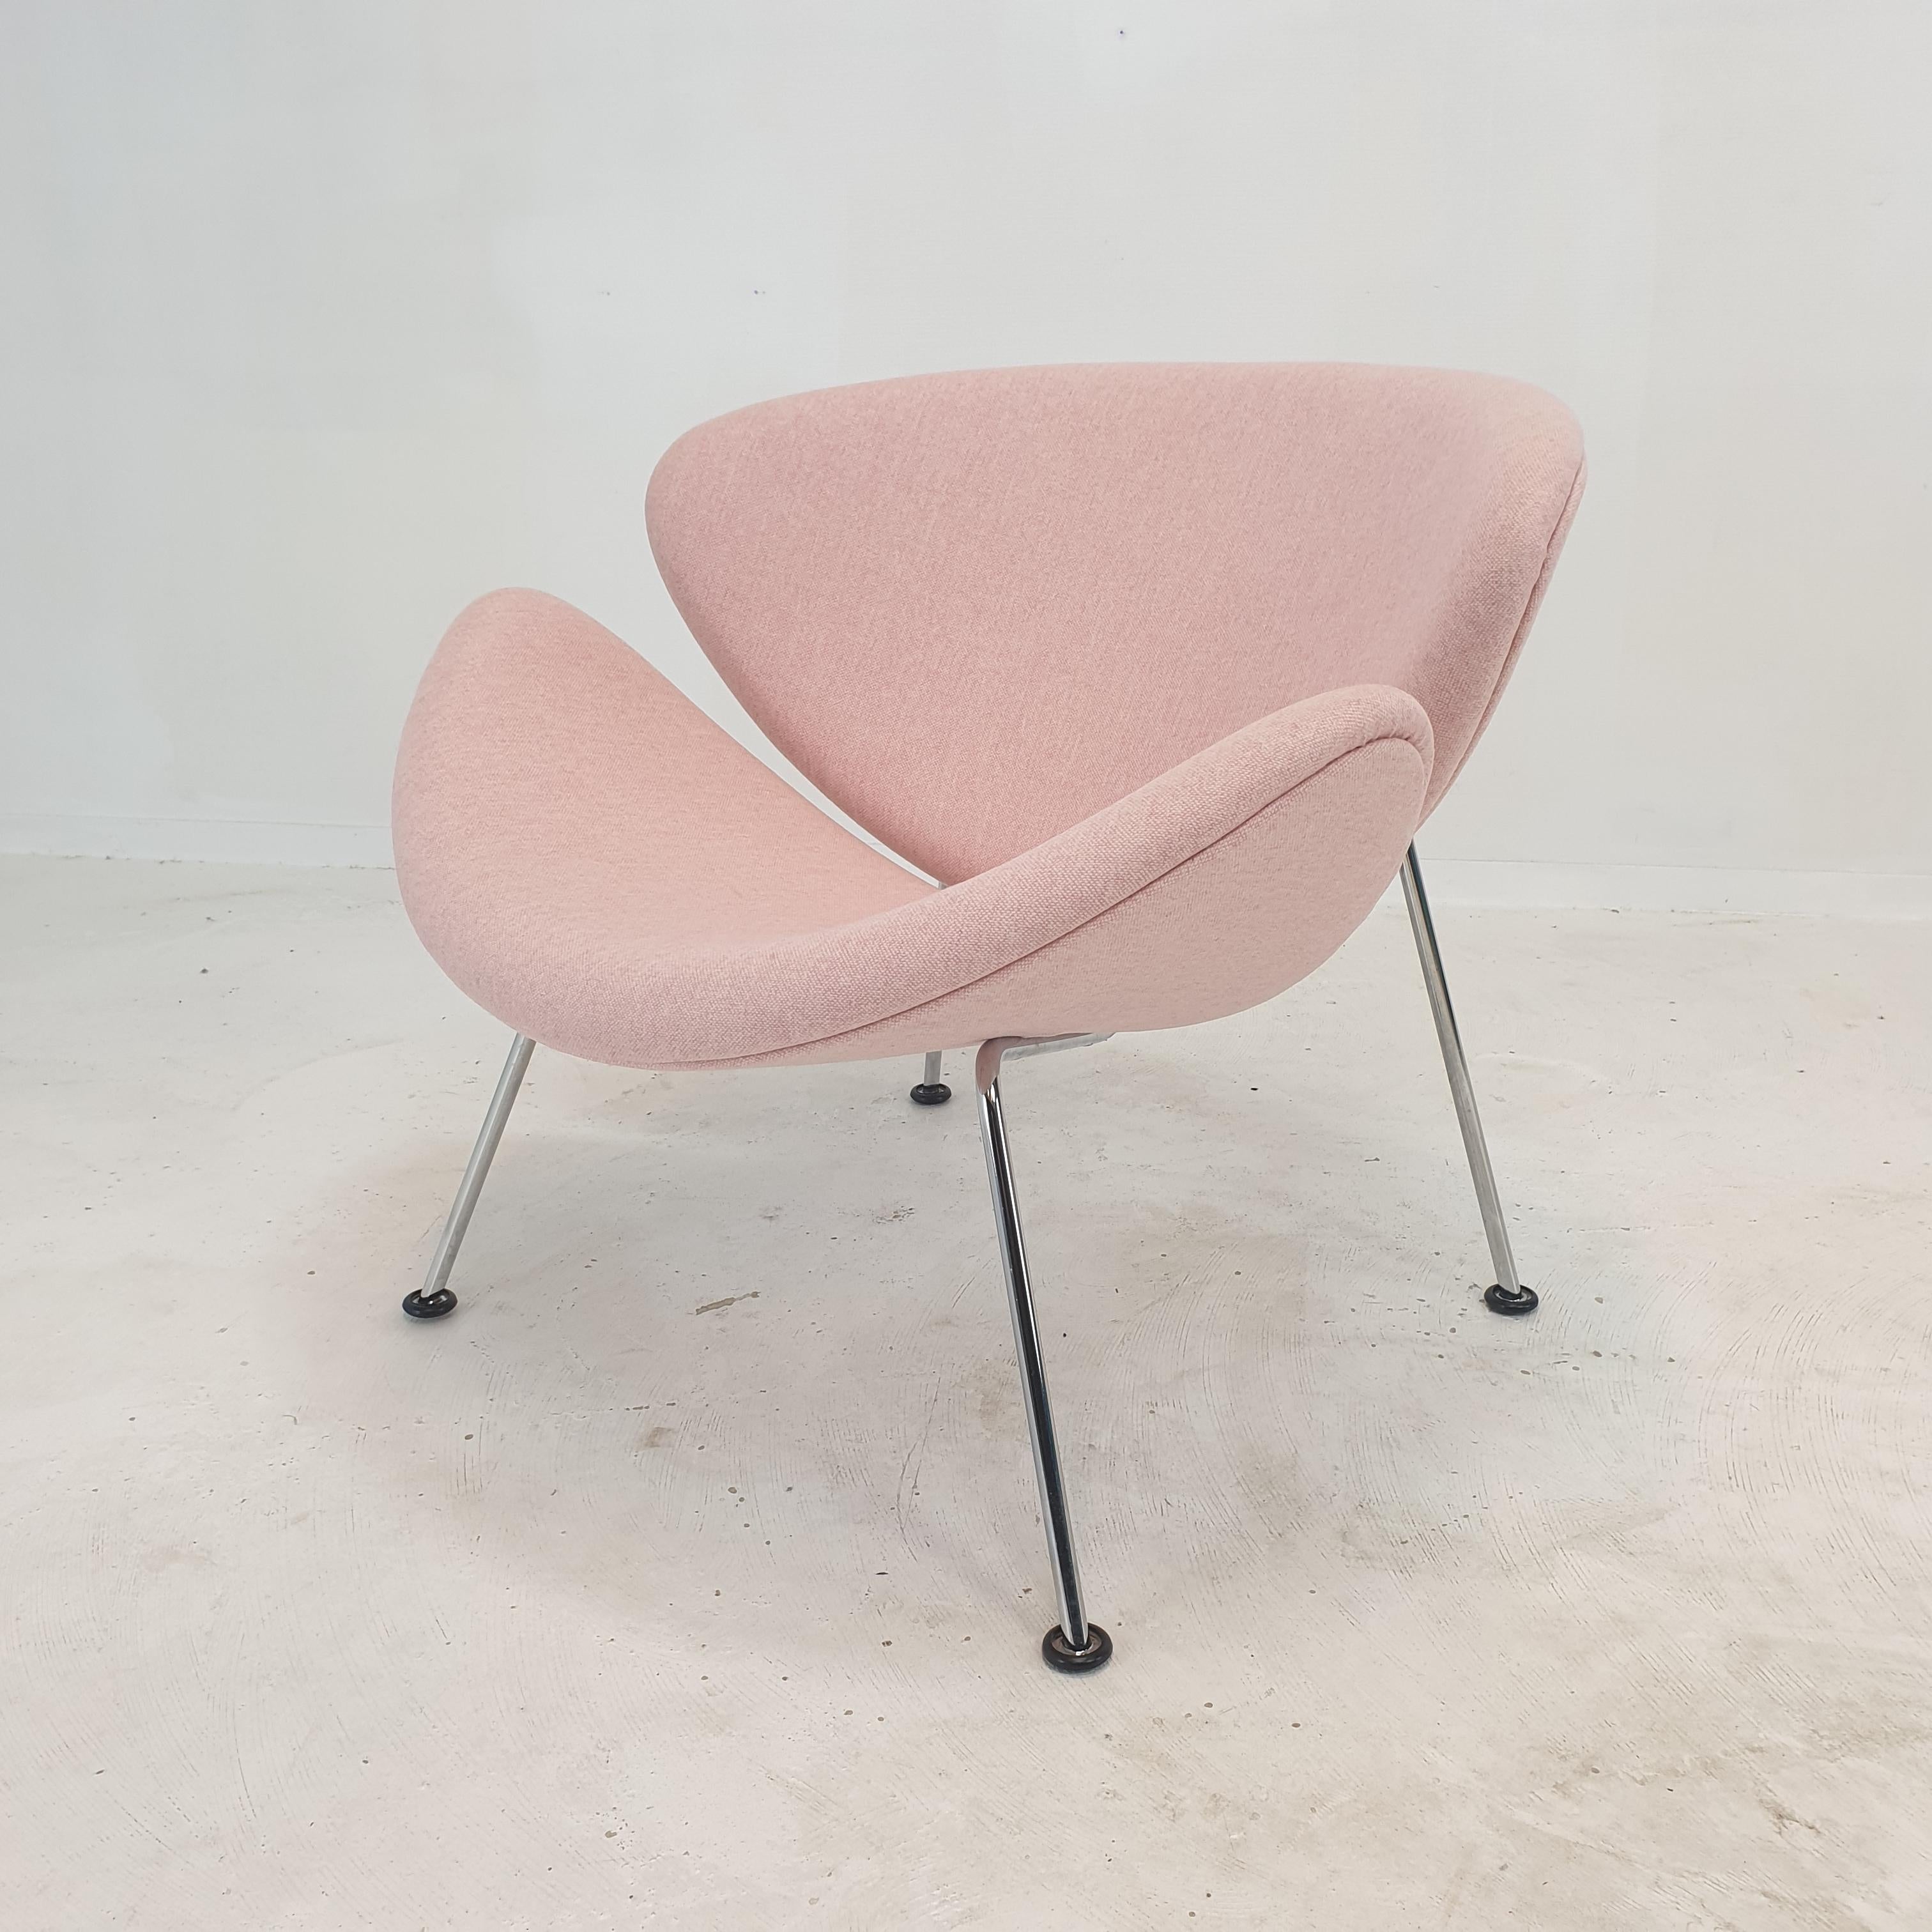 The famous Artifort Orange Slice chair by Pierre Paulin, designed in the 60's.
This is an original set with chromed legs, they are produced in the 80's.

It is a cute and very comfortable chair.

This set is just restored with new fabric and